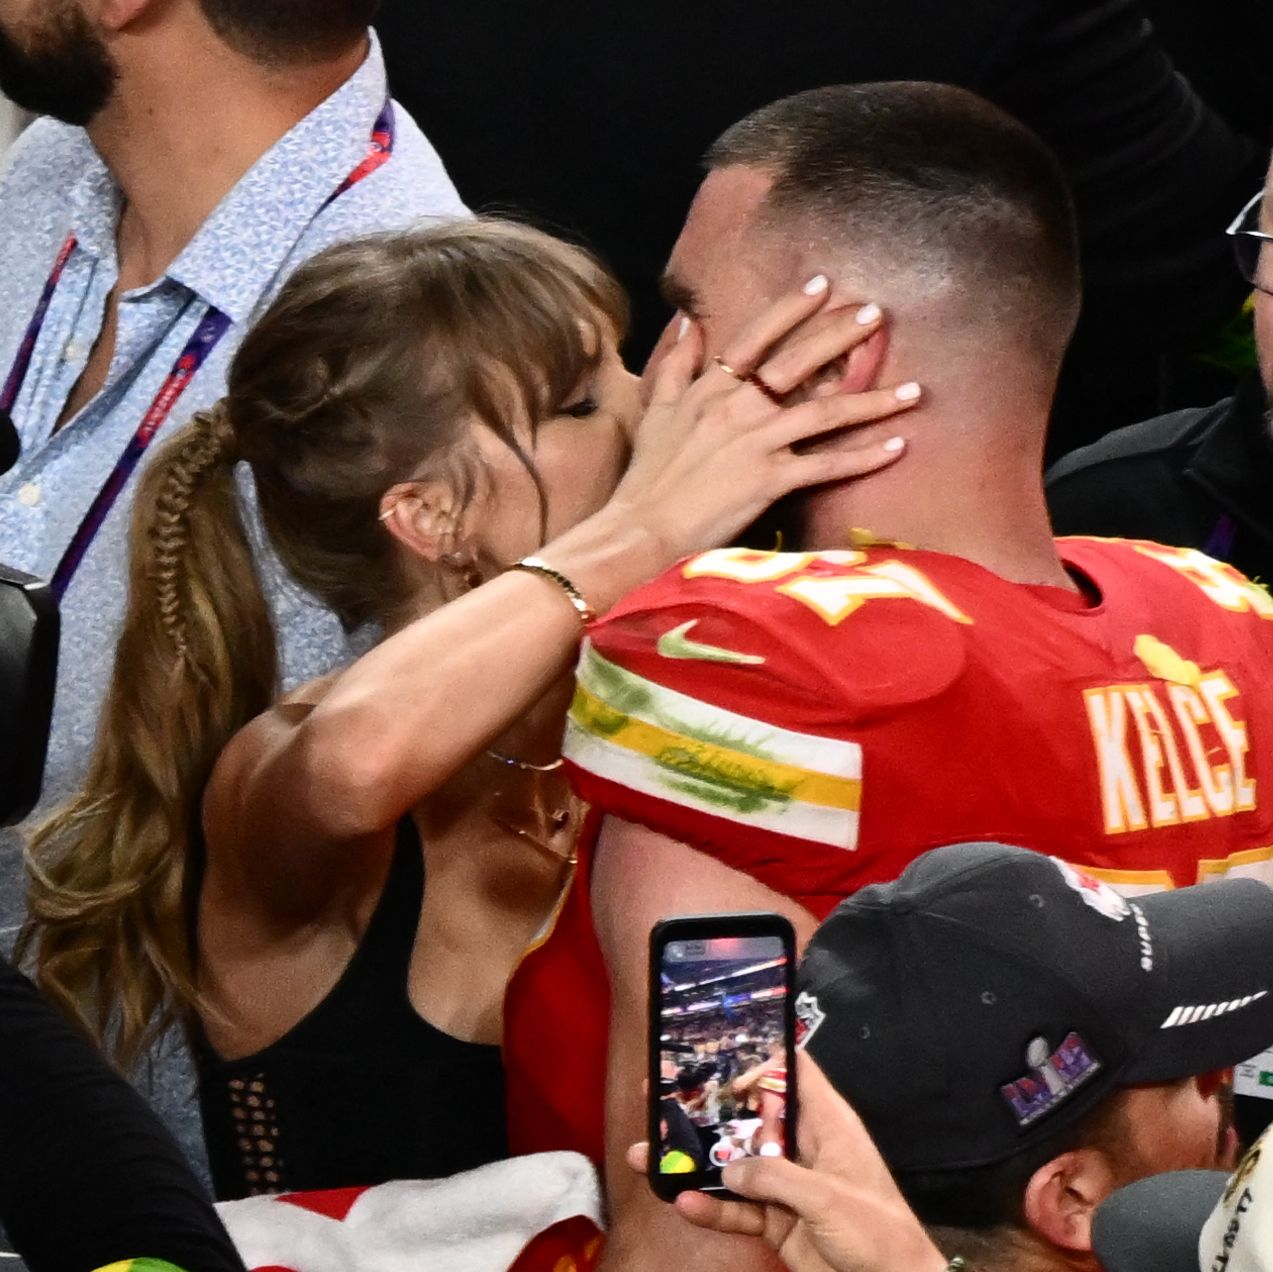 The couple reunited and showed so much affection after the Chiefs' win.